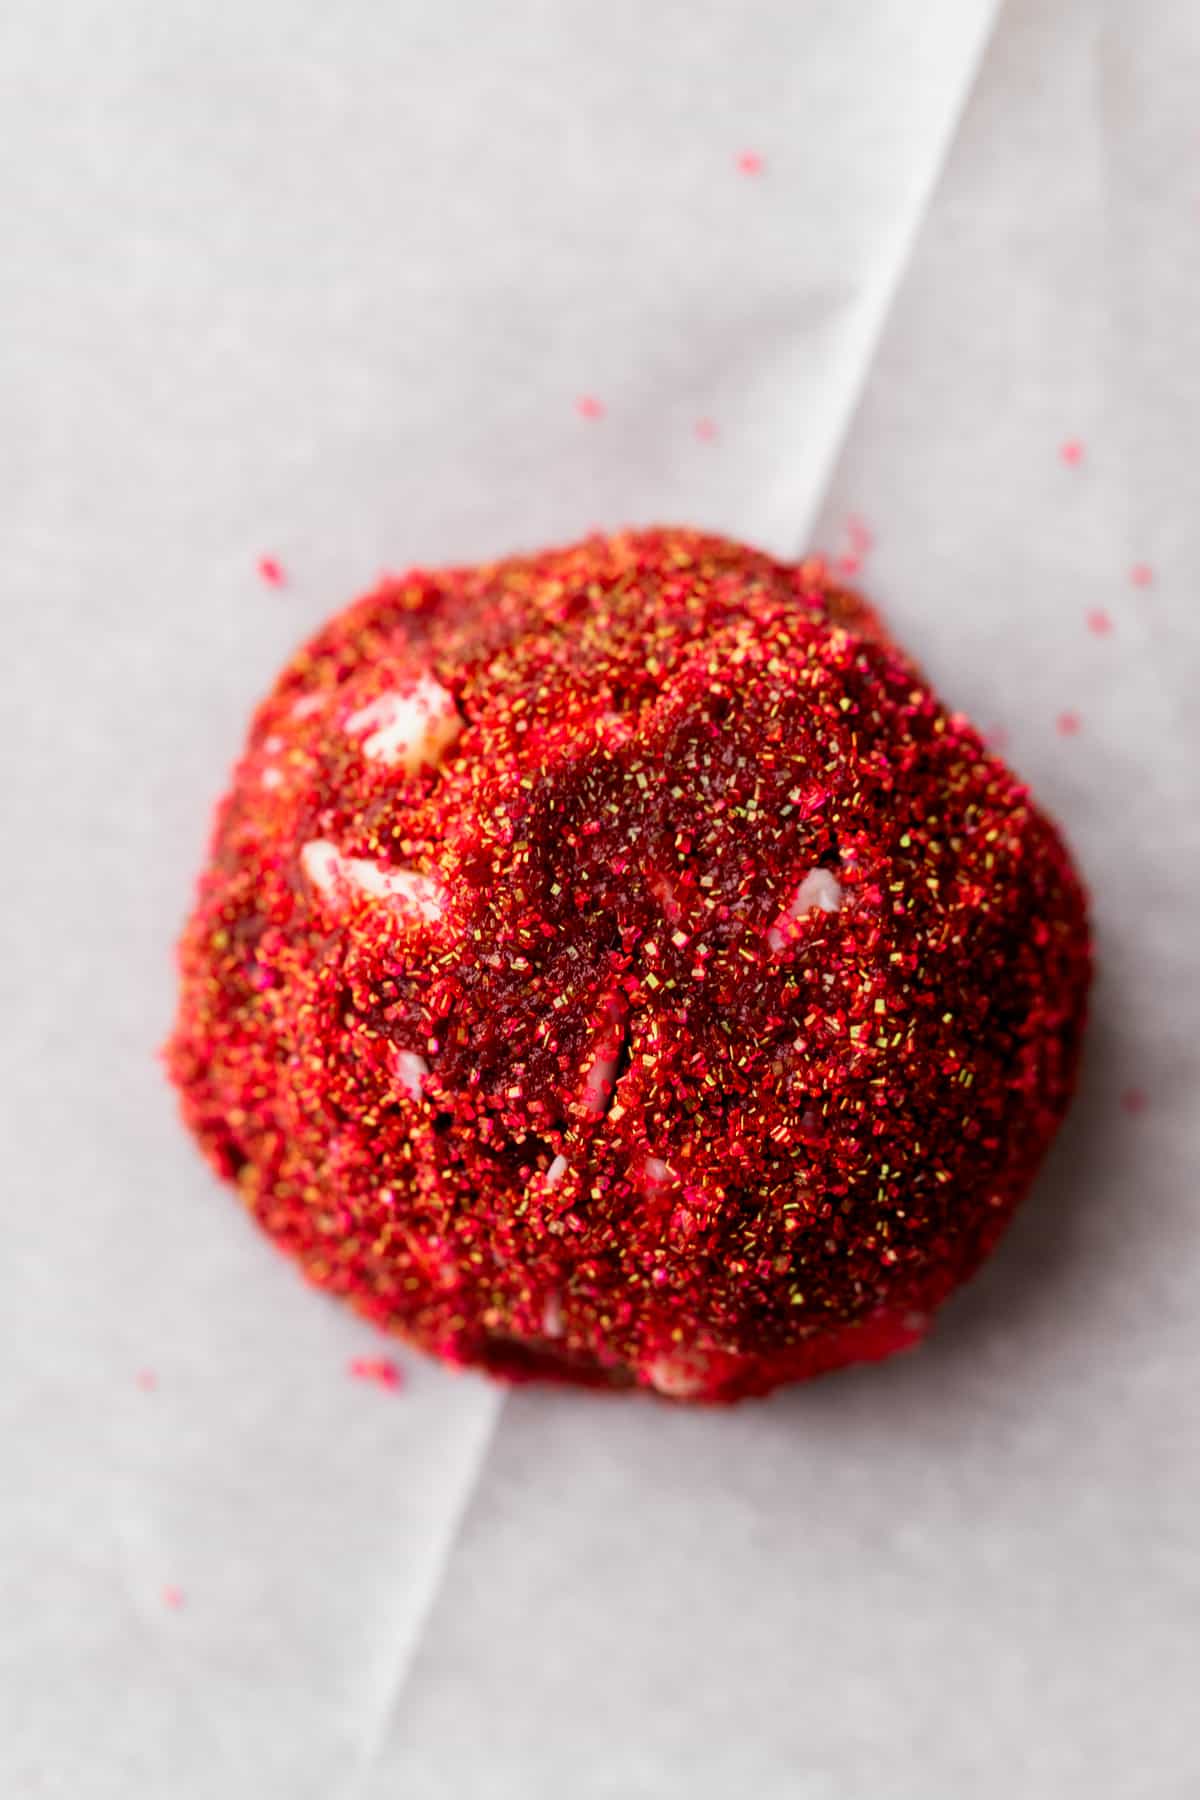 Cookie dough ball covered in red sugar.